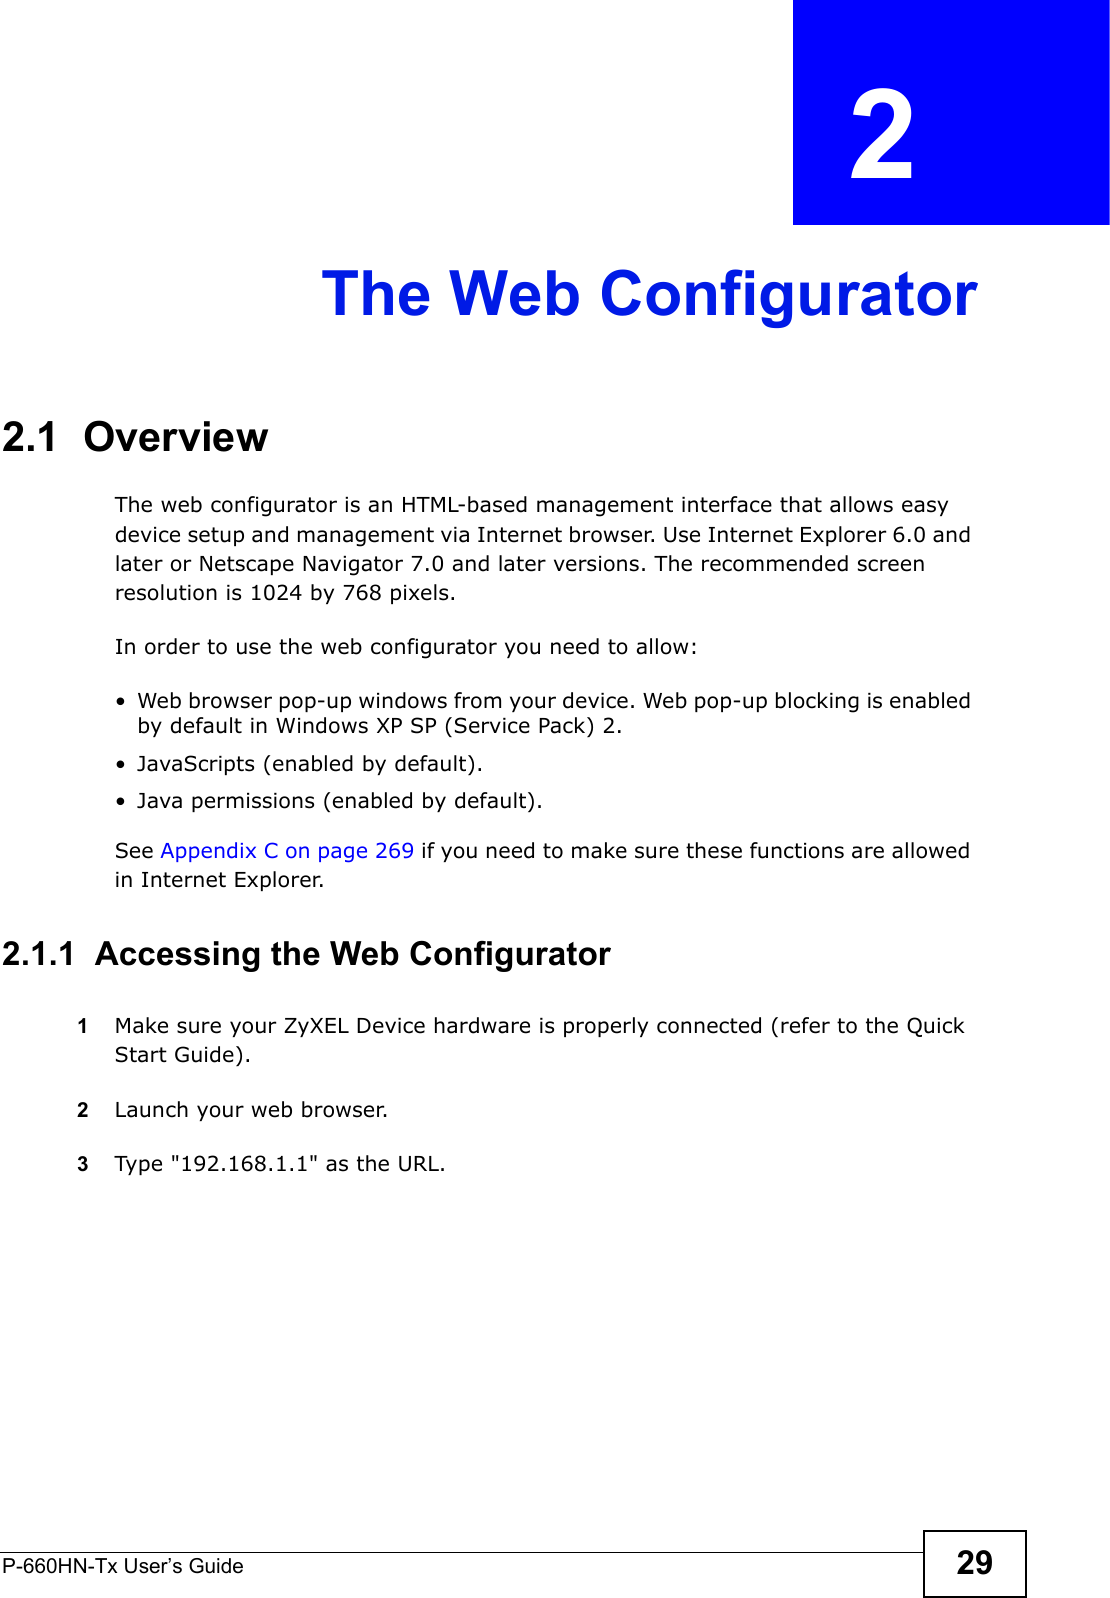 P-660HN-Tx User’s Guide 29CHAPTER  2 The Web Configurator2.1  OverviewThe web configurator is an HTML-based management interface that allows easy device setup and management via Internet browser. Use Internet Explorer 6.0 and later or Netscape Navigator 7.0 and later versions. The recommended screen resolution is 1024 by 768 pixels.In order to use the web configurator you need to allow:• Web browser pop-up windows from your device. Web pop-up blocking is enabled by default in Windows XP SP (Service Pack) 2.• JavaScripts (enabled by default).• Java permissions (enabled by default).See Appendix C on page 269 if you need to make sure these functions are allowed in Internet Explorer.2.1.1  Accessing the Web Configurator1Make sure your ZyXEL Device hardware is properly connected (refer to the Quick Start Guide).2Launch your web browser.3Type &quot;192.168.1.1&quot; as the URL.